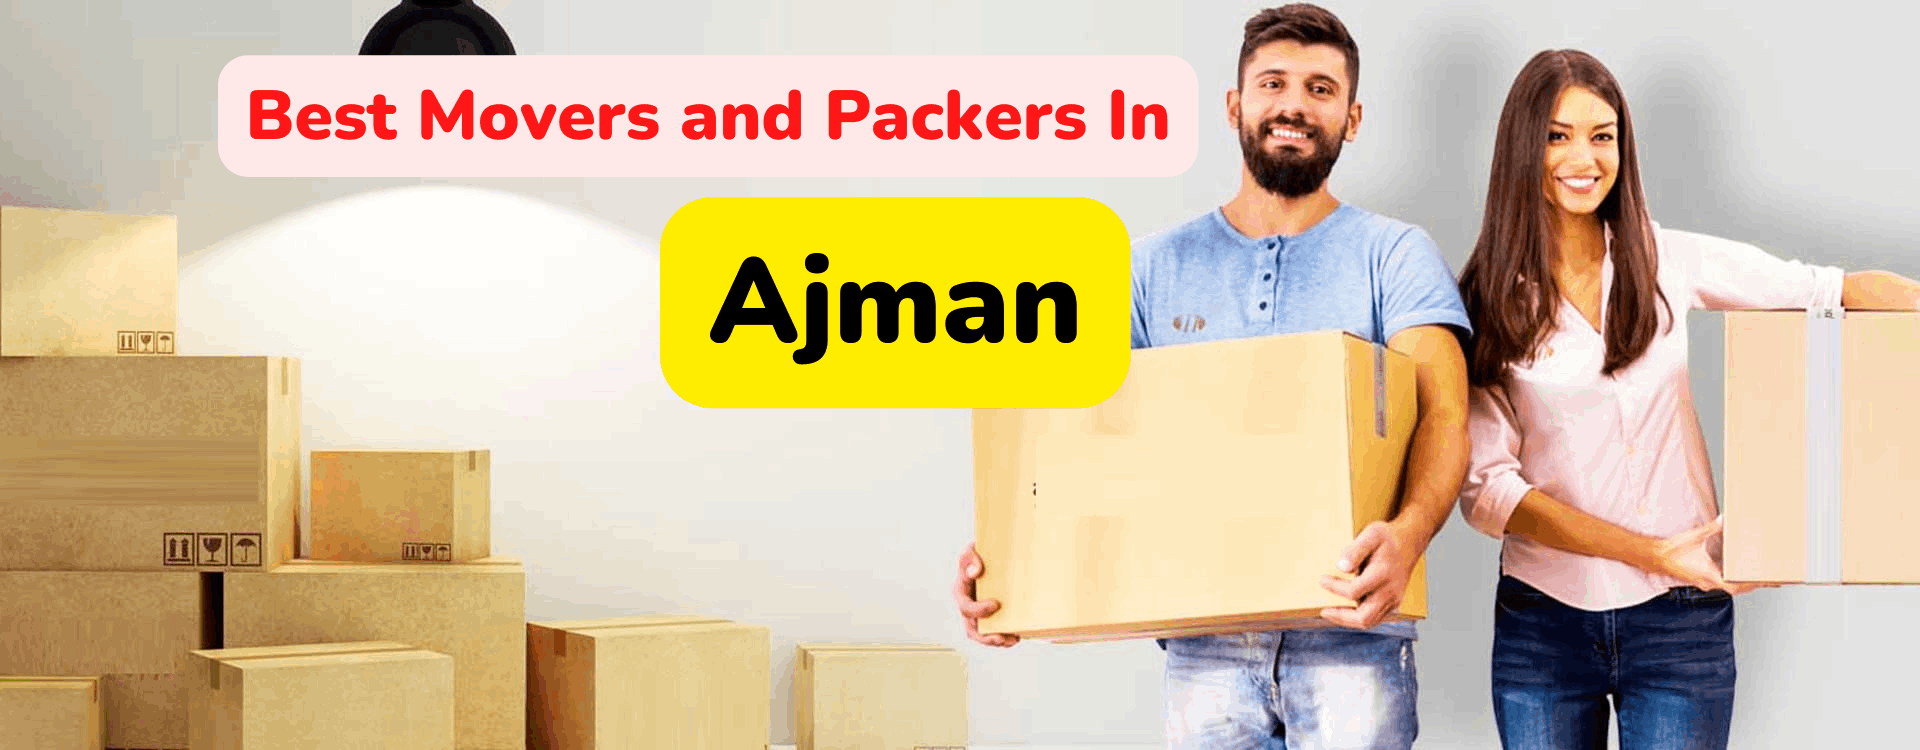 Best Movers and packers 1 11zon